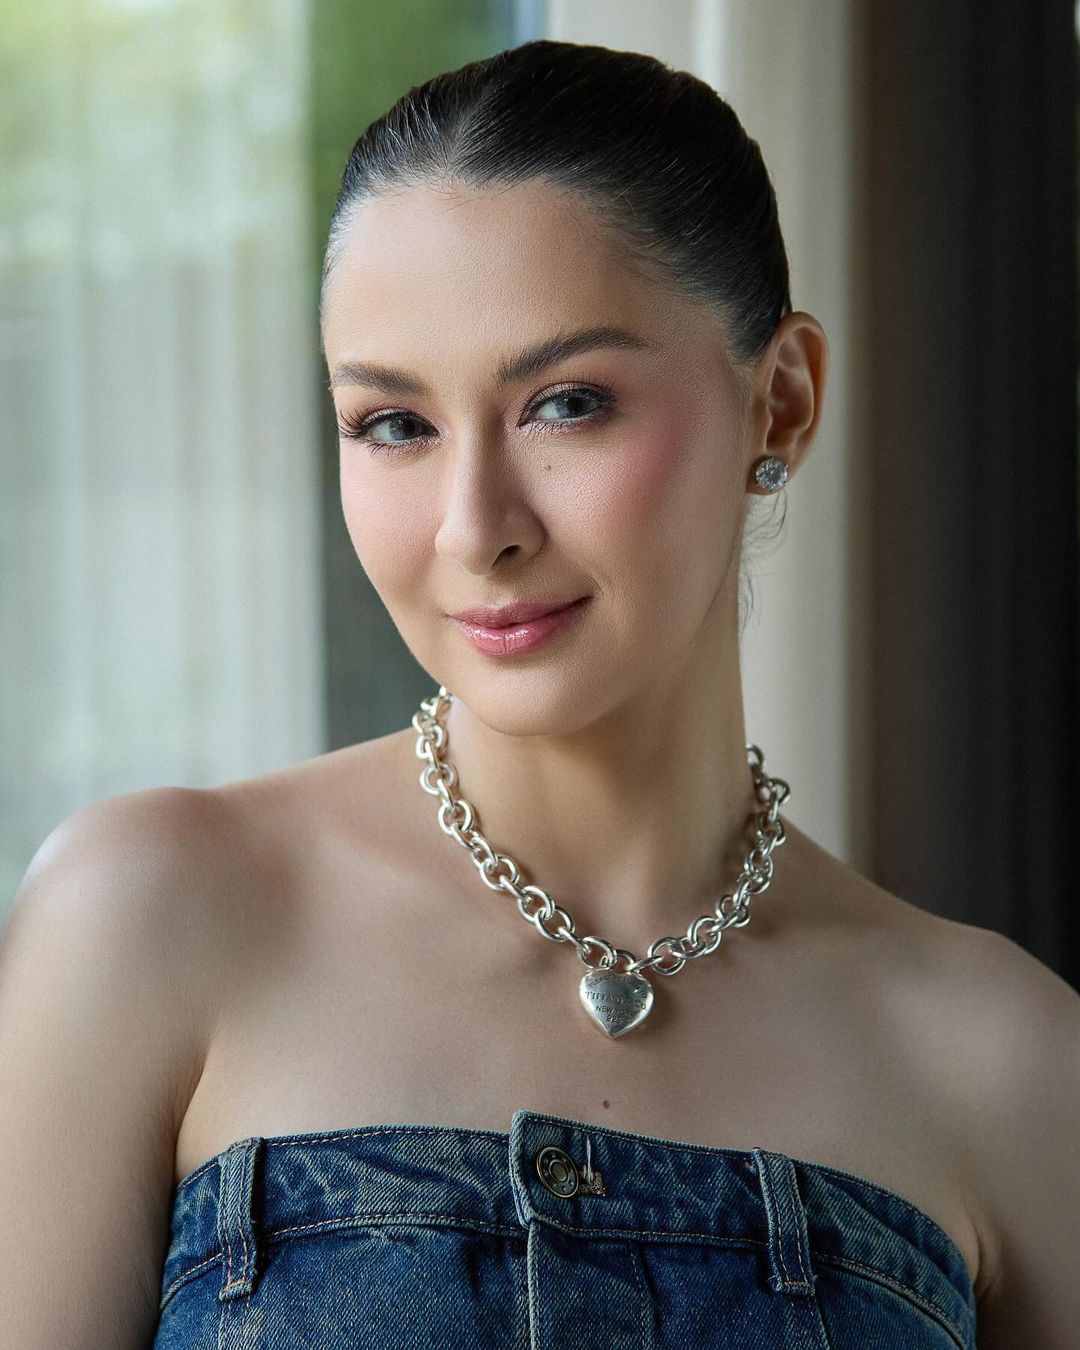 Be Inspired by Marian Rivera's Luxury Jewelry For Valentine's DayTIFFANY'S